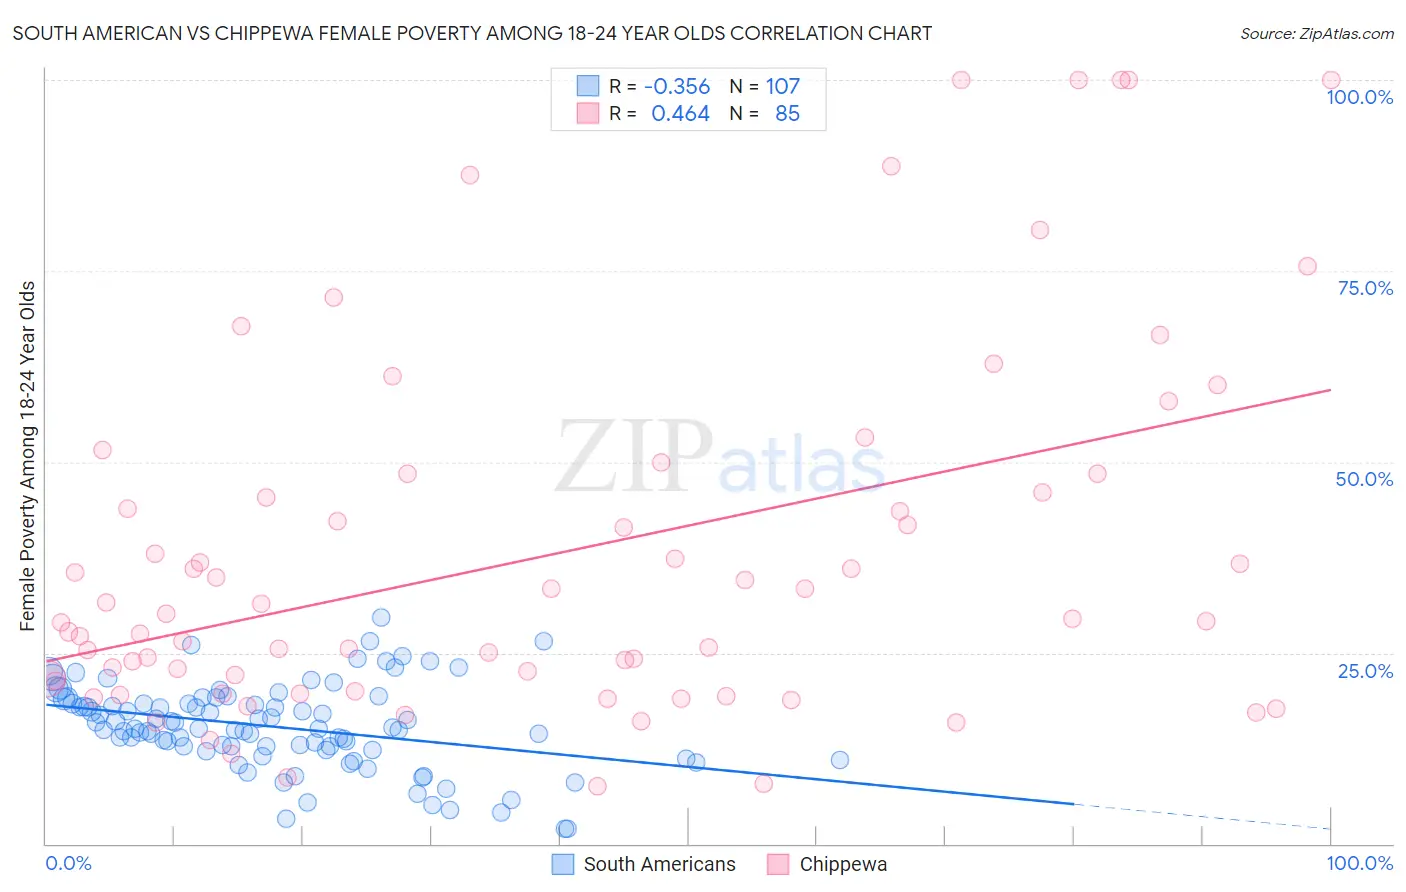 South American vs Chippewa Female Poverty Among 18-24 Year Olds